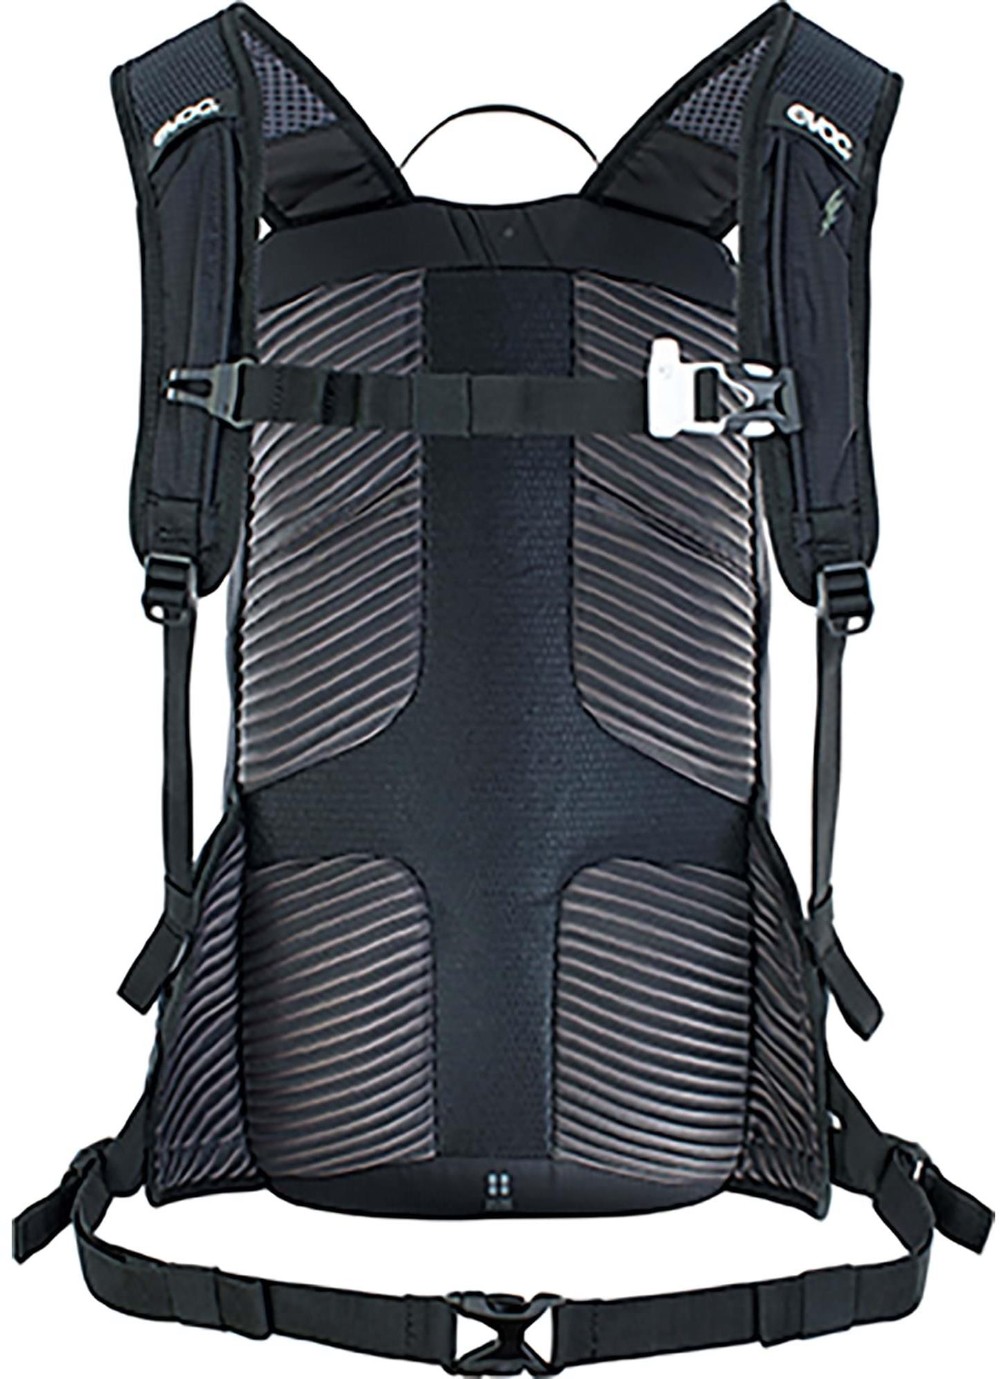 E-Ride 12L Performance Backpack image 1